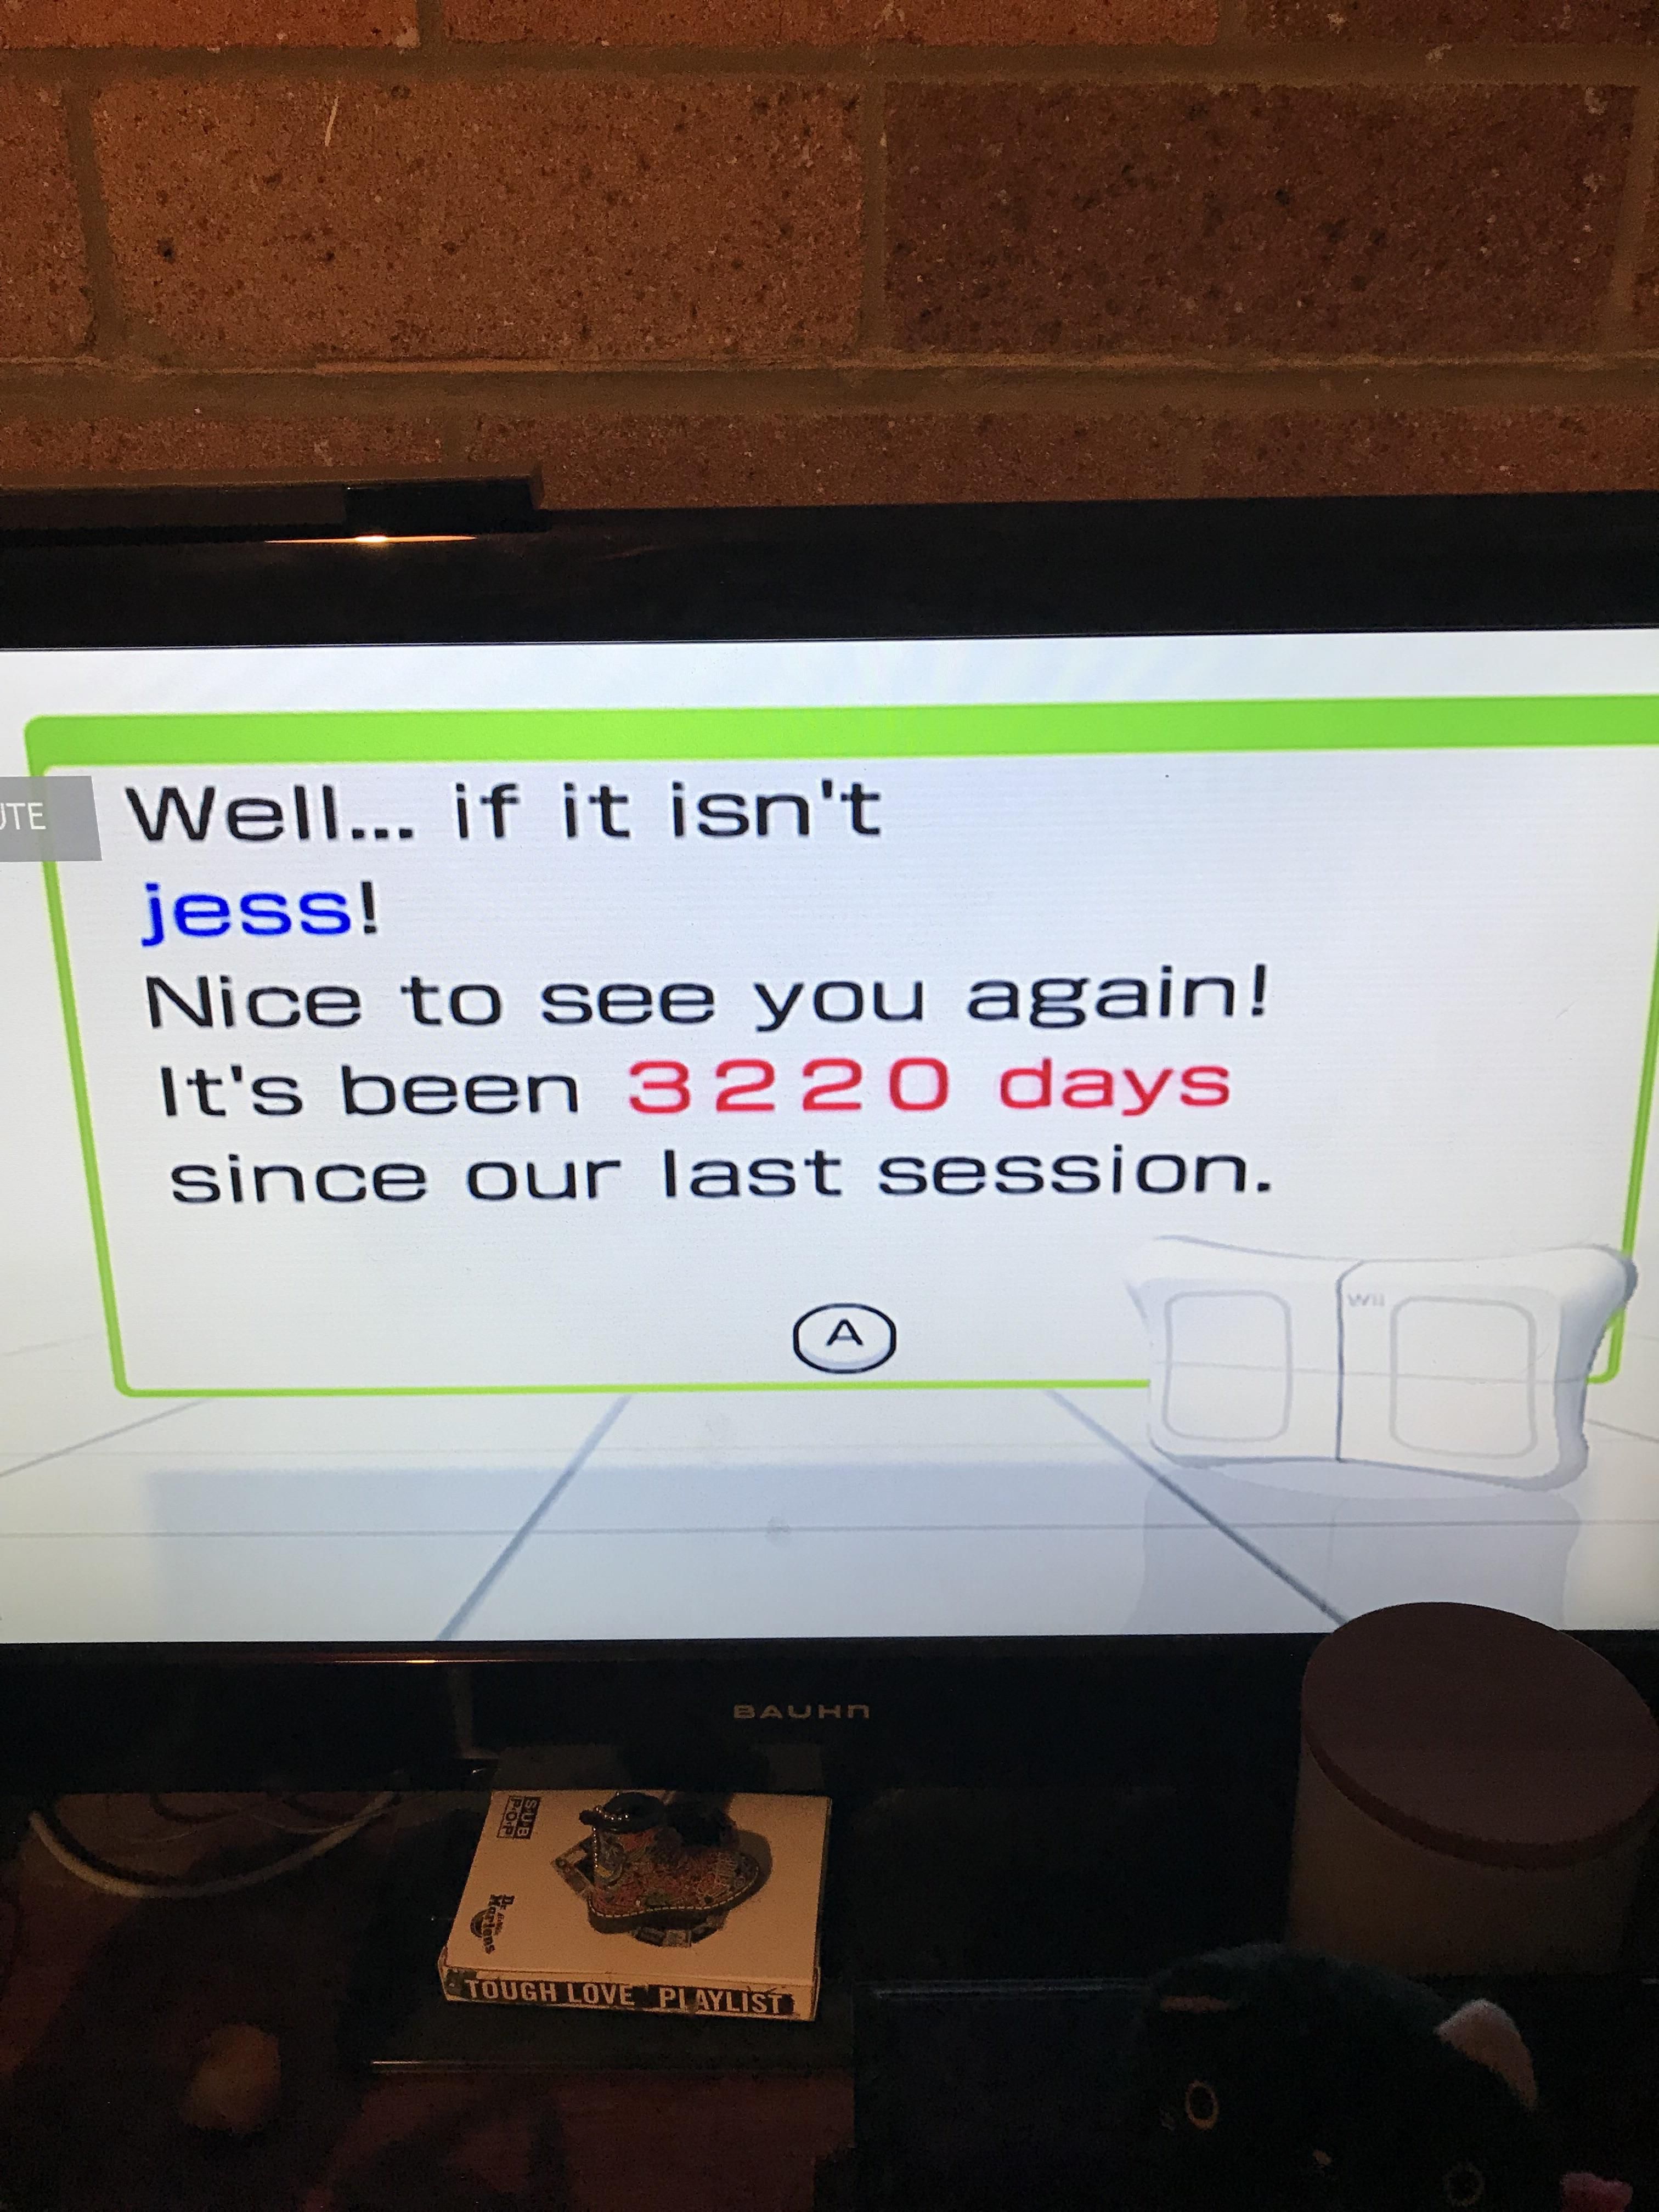 My fiancé just plugged in her Wii for the first time in a while...